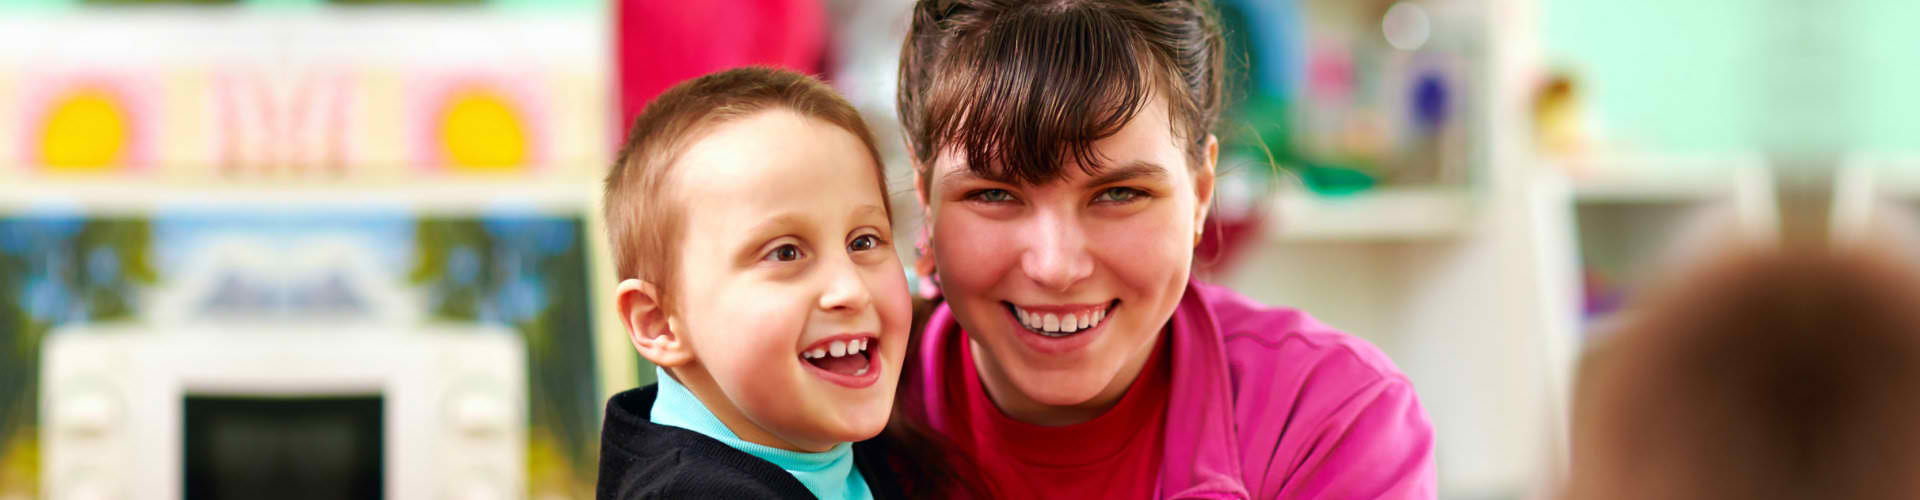 boy with disabilities together with a woman